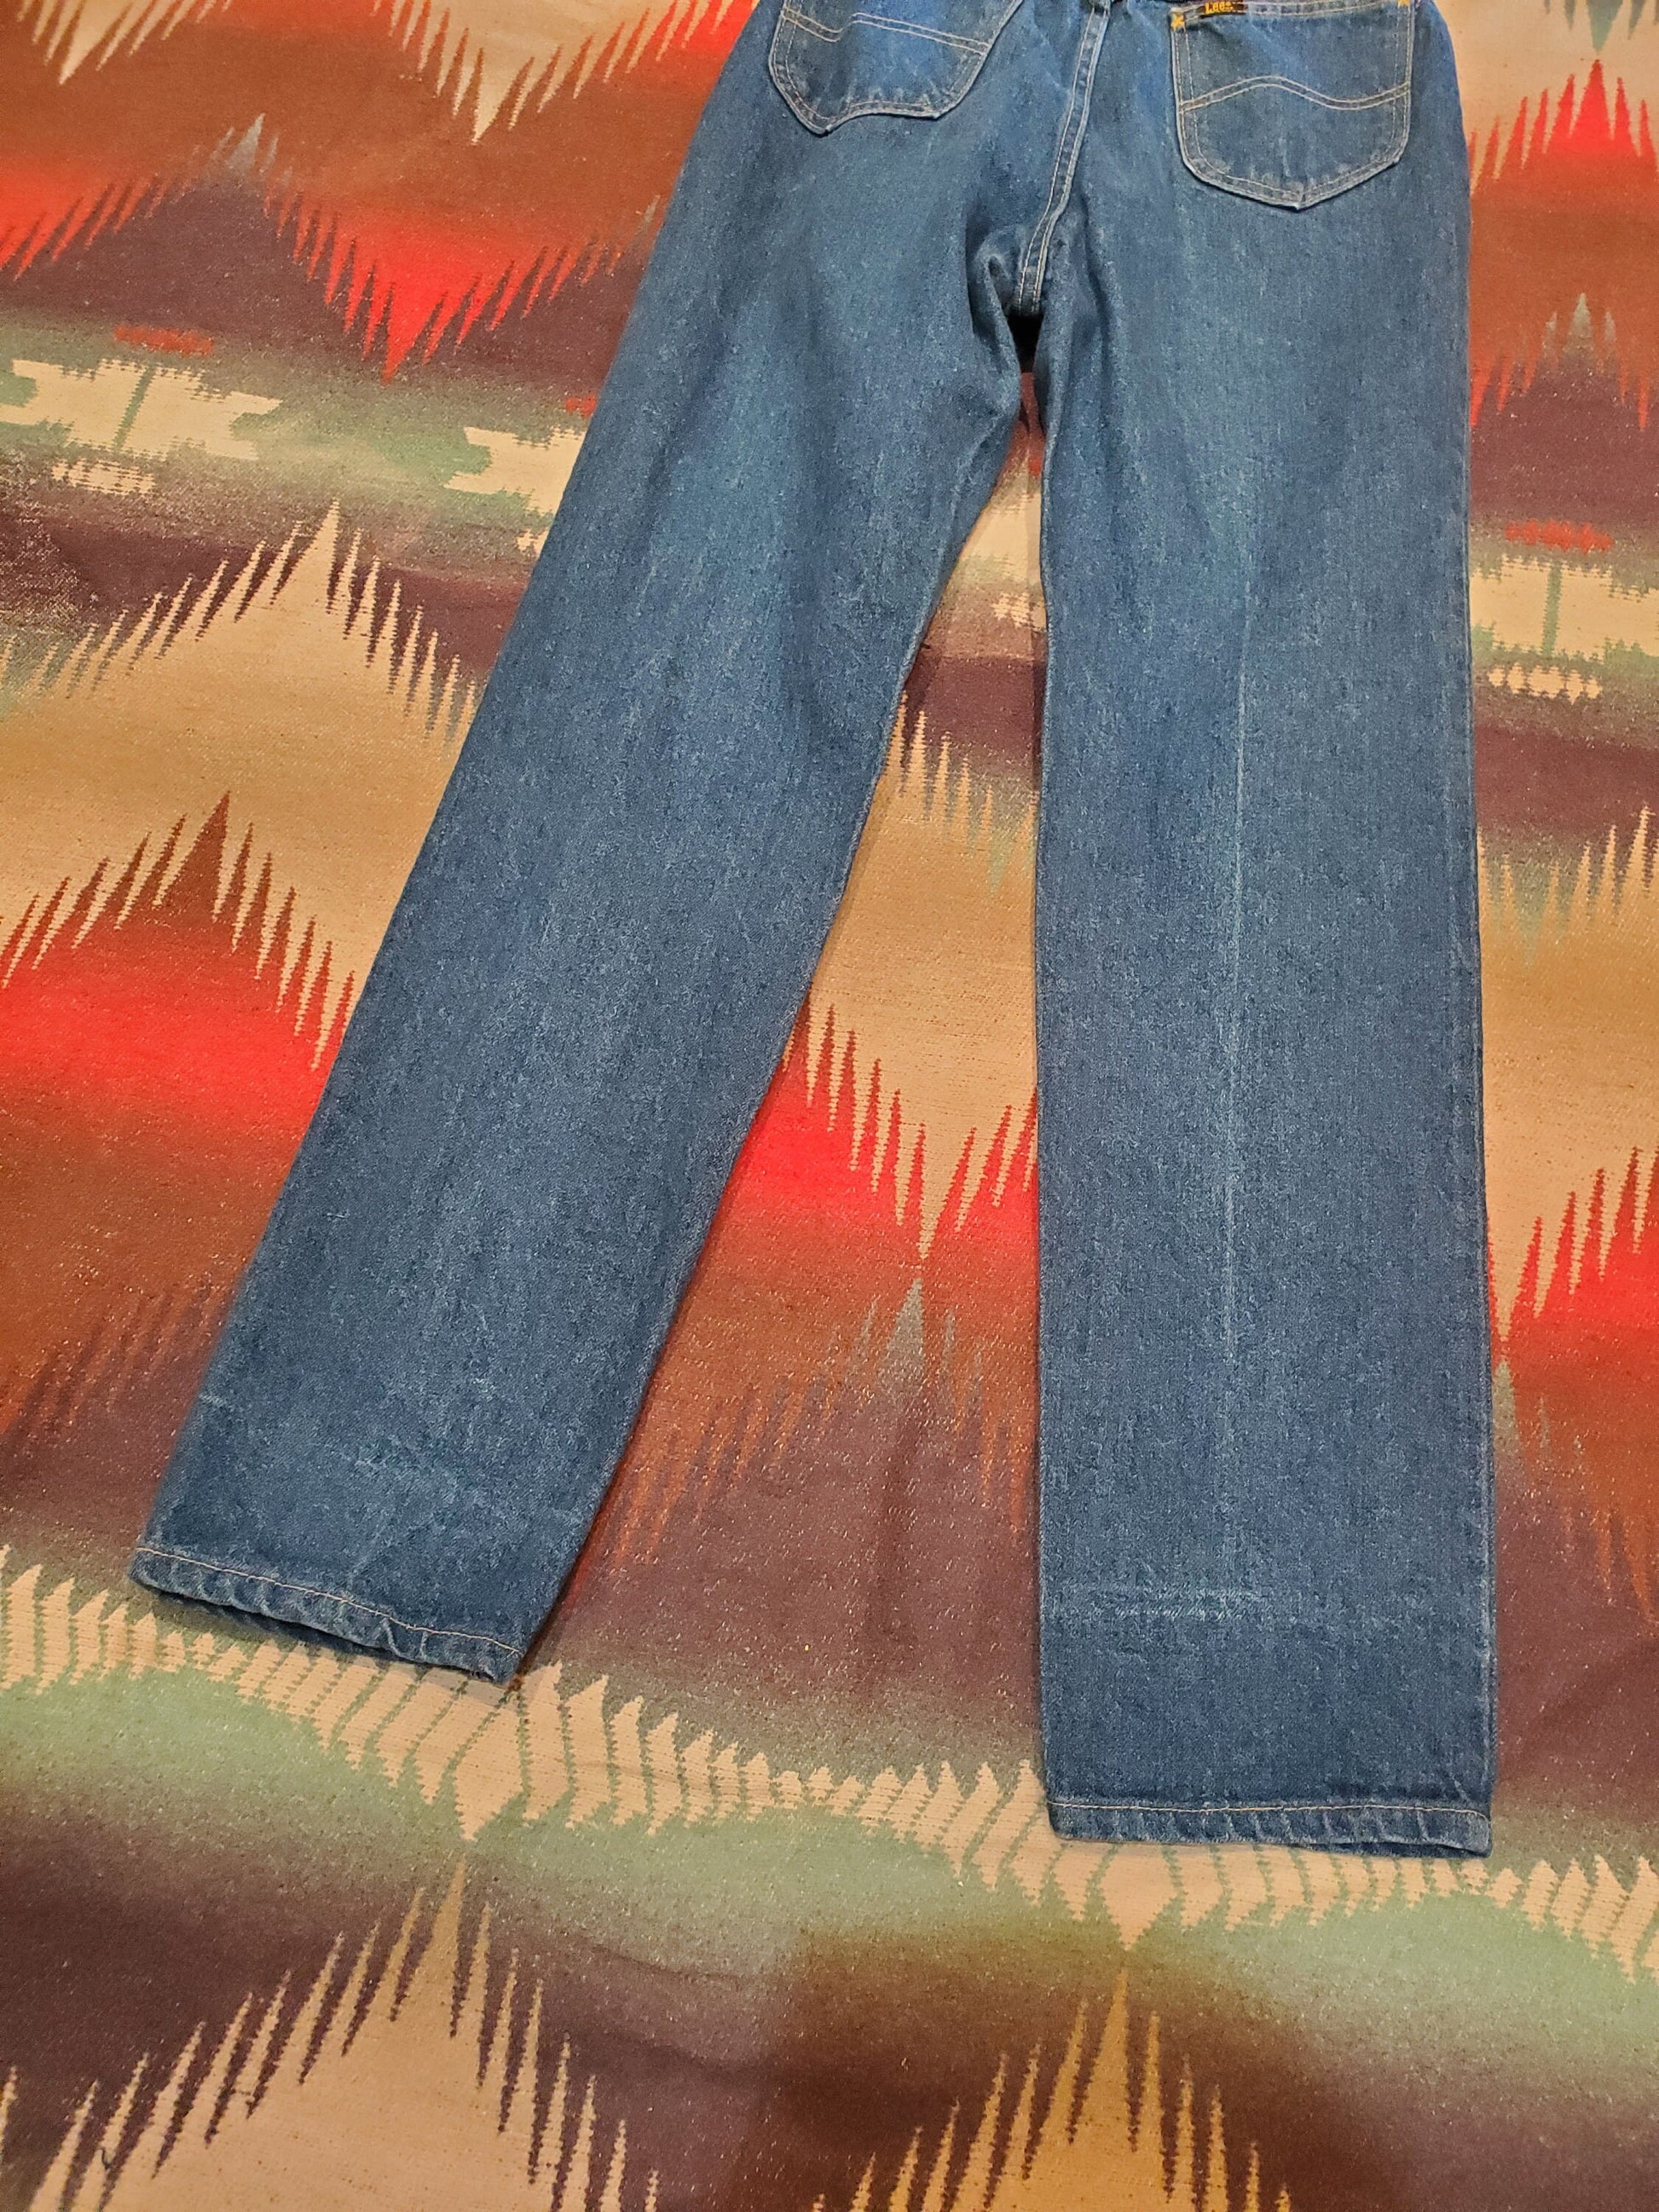 1980s/1990s Lee Riders Dark Blue Denim Jeans Made in USA Size 26x31